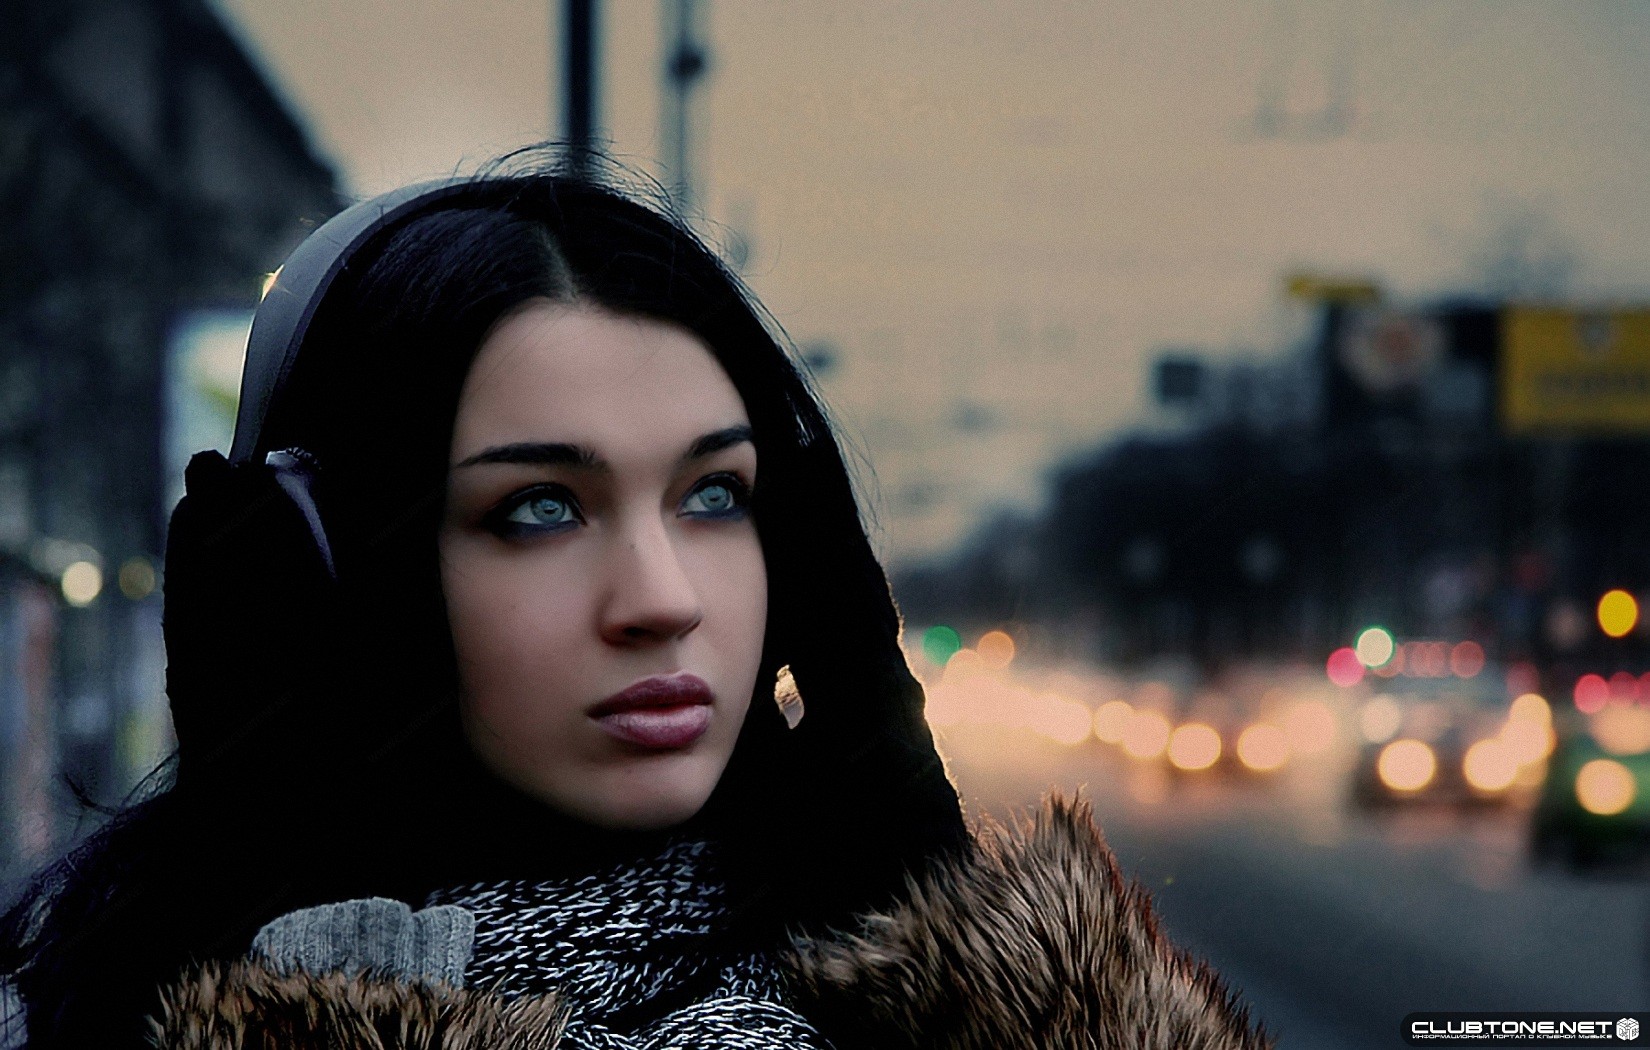 People 1650x1050 women headphones urban face blue eyes black hair model women outdoors makeup red lipstick watermarked looking away looking into the distance